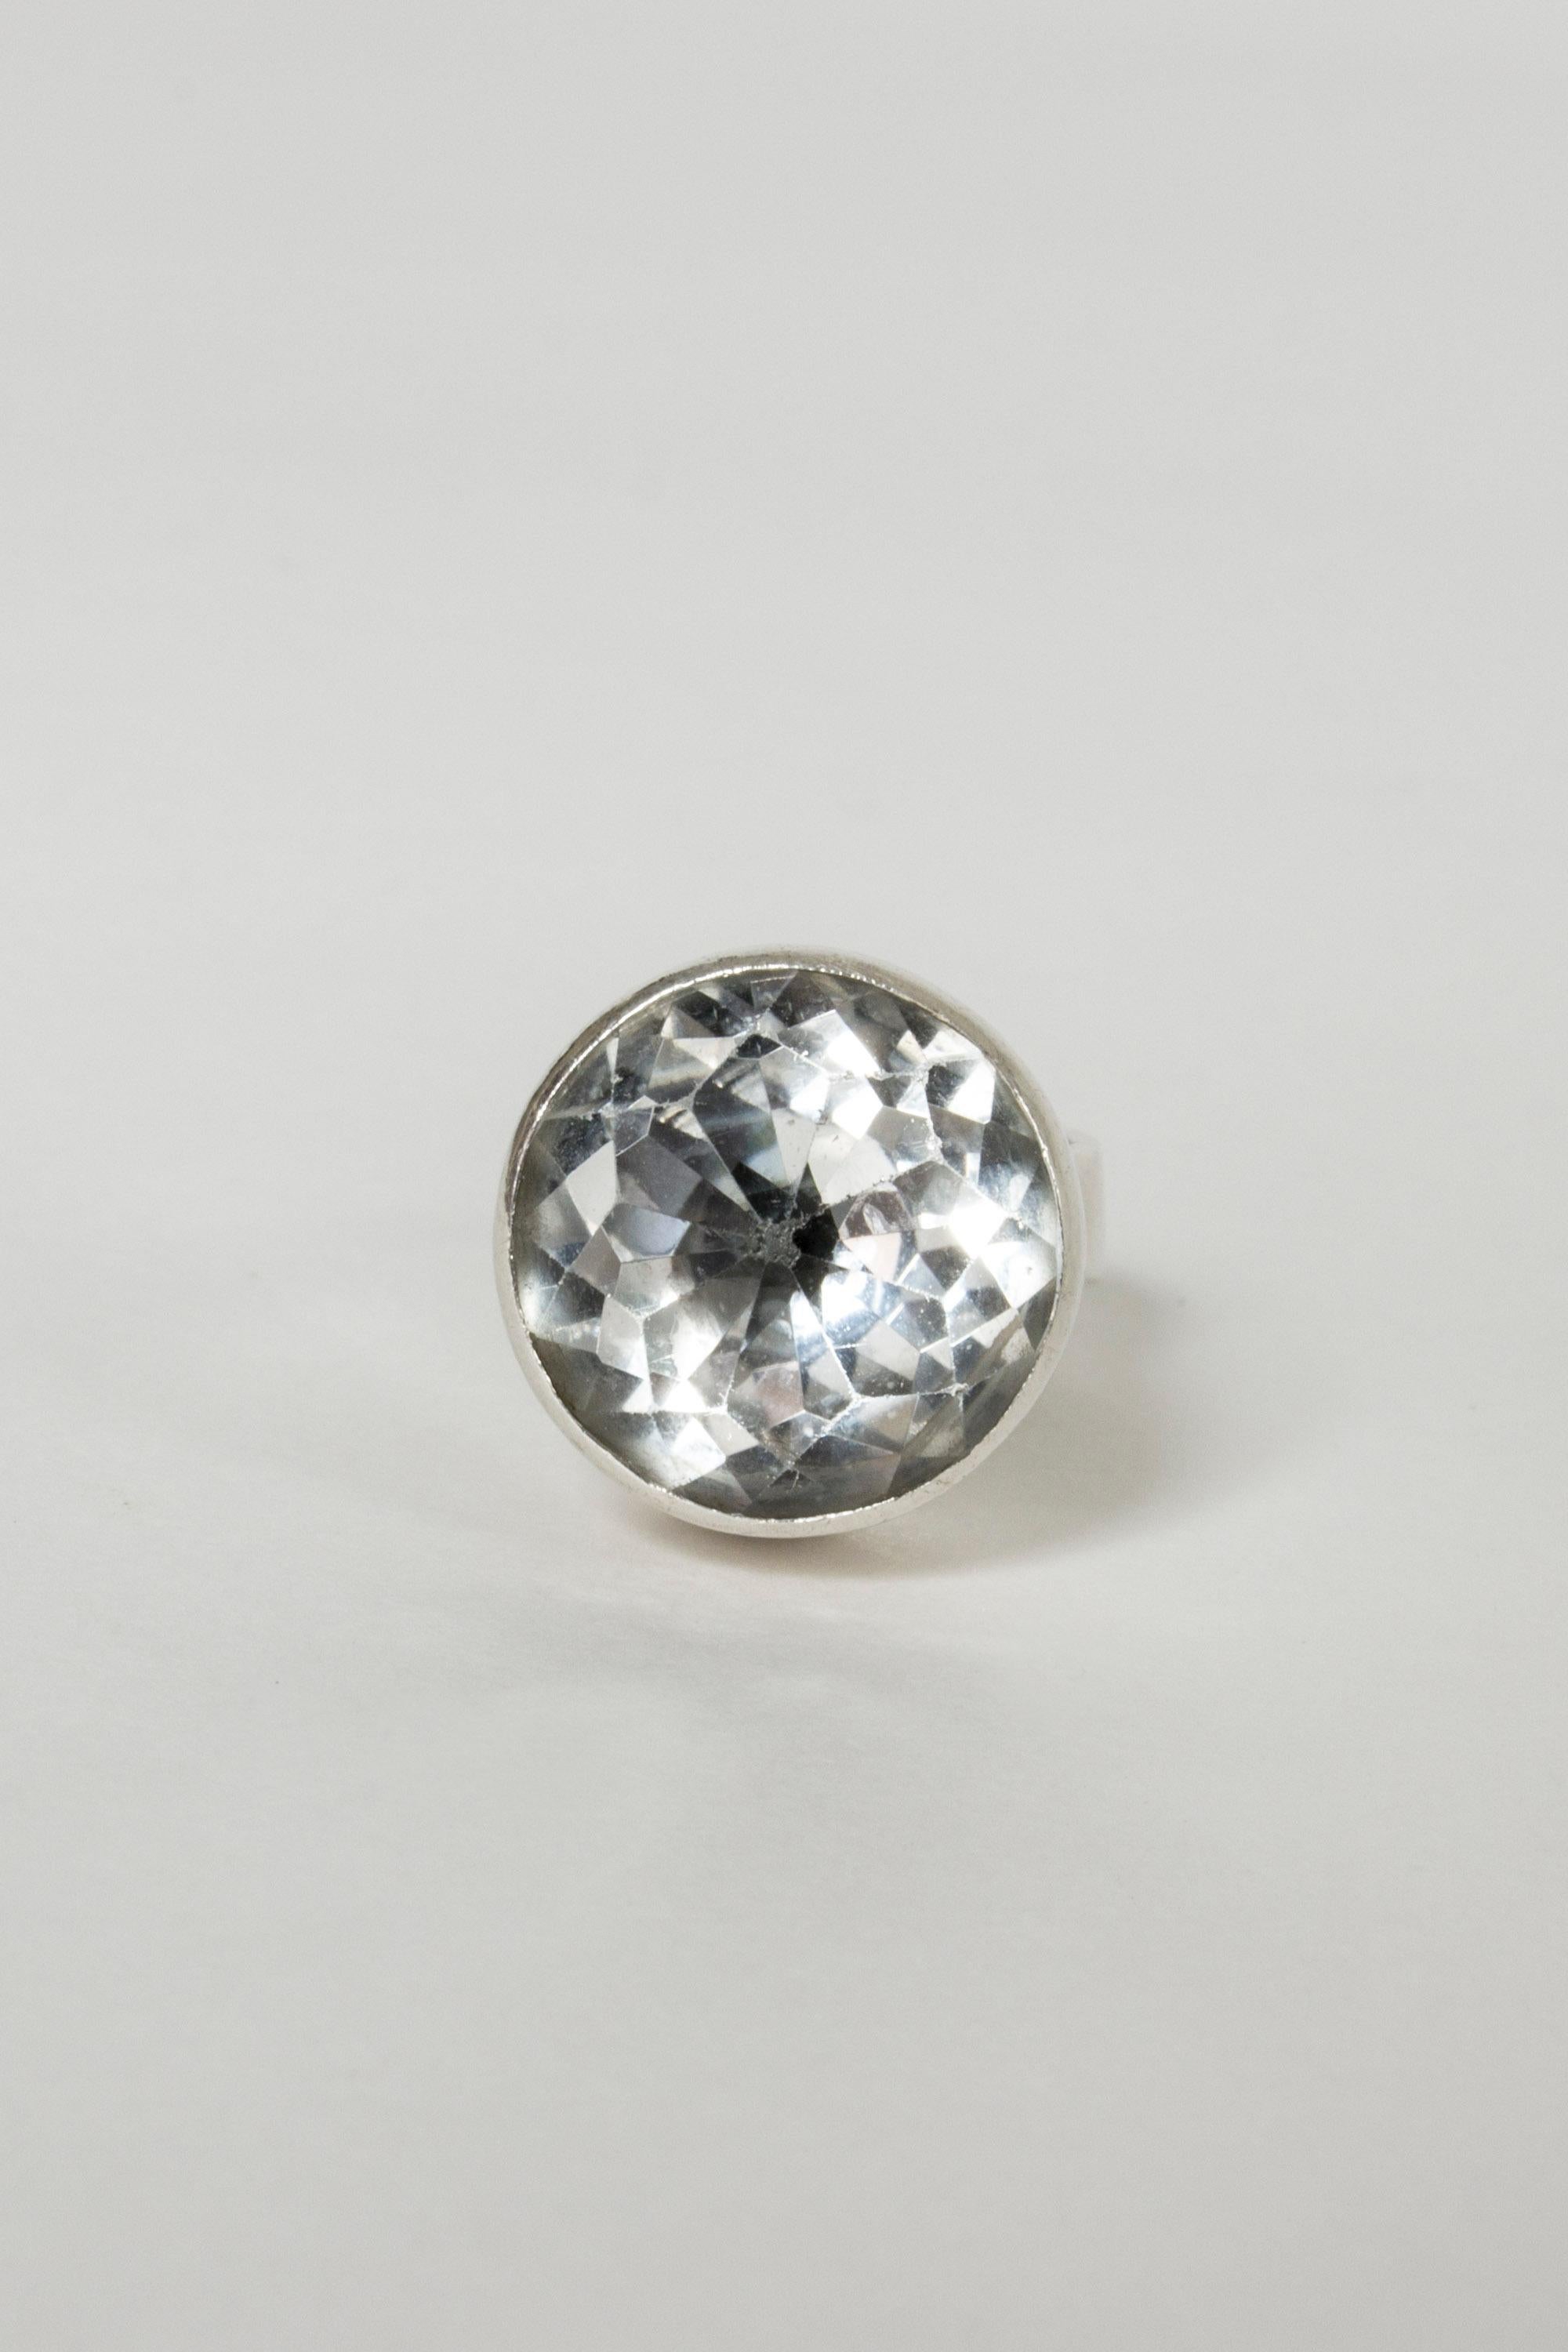 Cool silver ring by Isaac Cohen, with a large rock crystal stone. Clean design with nice play between the sparkly stone and smooth silver cylinder setting.